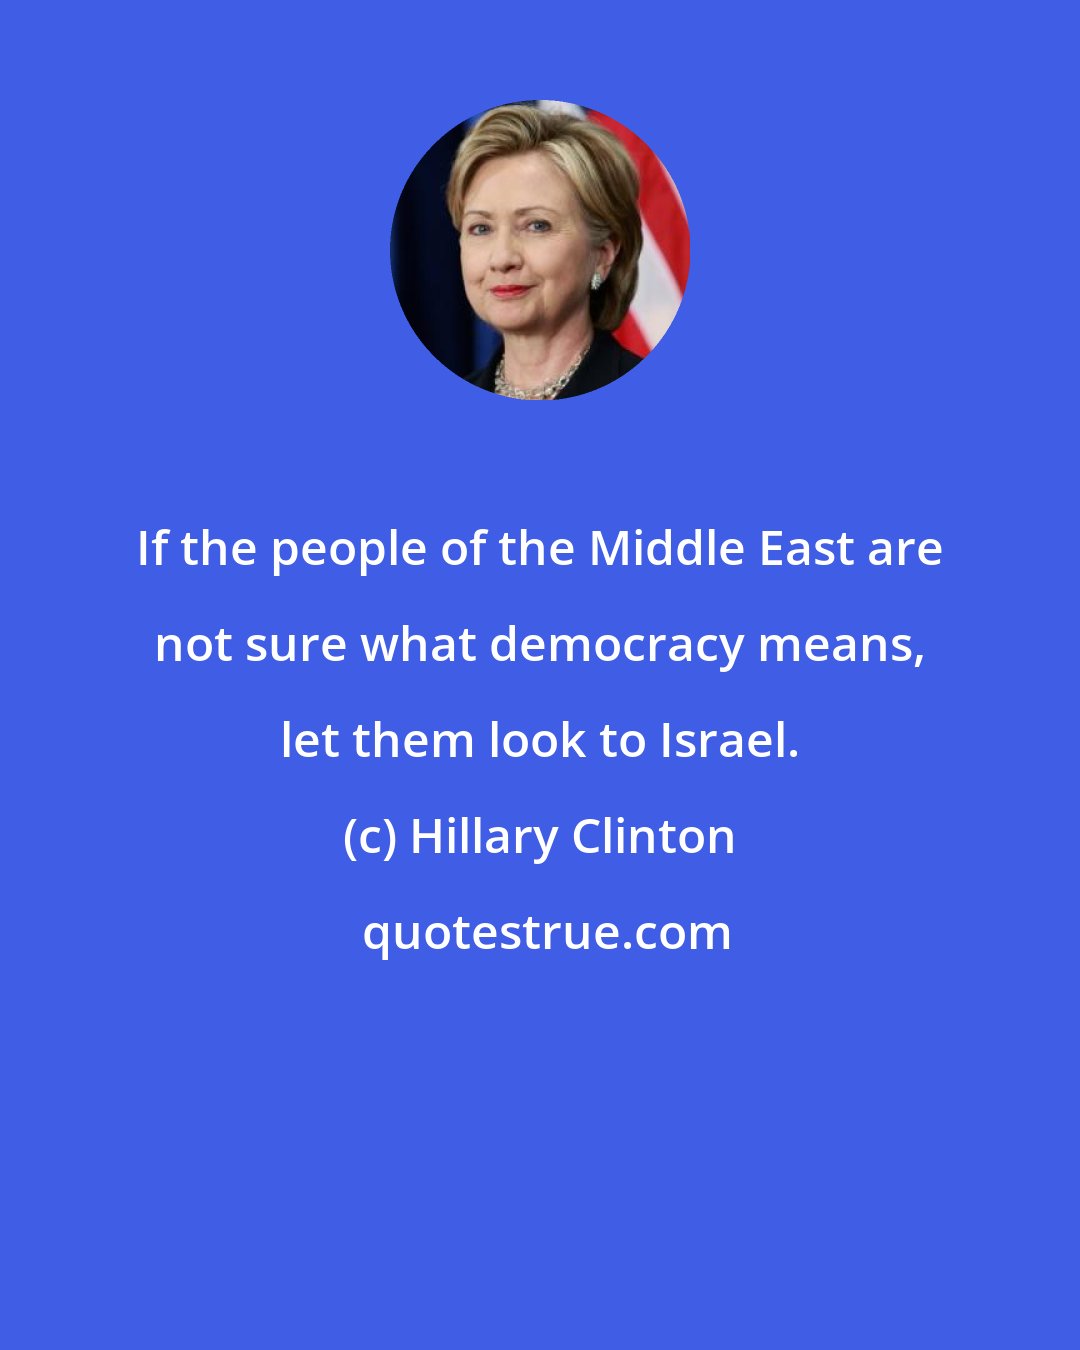 Hillary Clinton: If the people of the Middle East are not sure what democracy means, let them look to Israel.